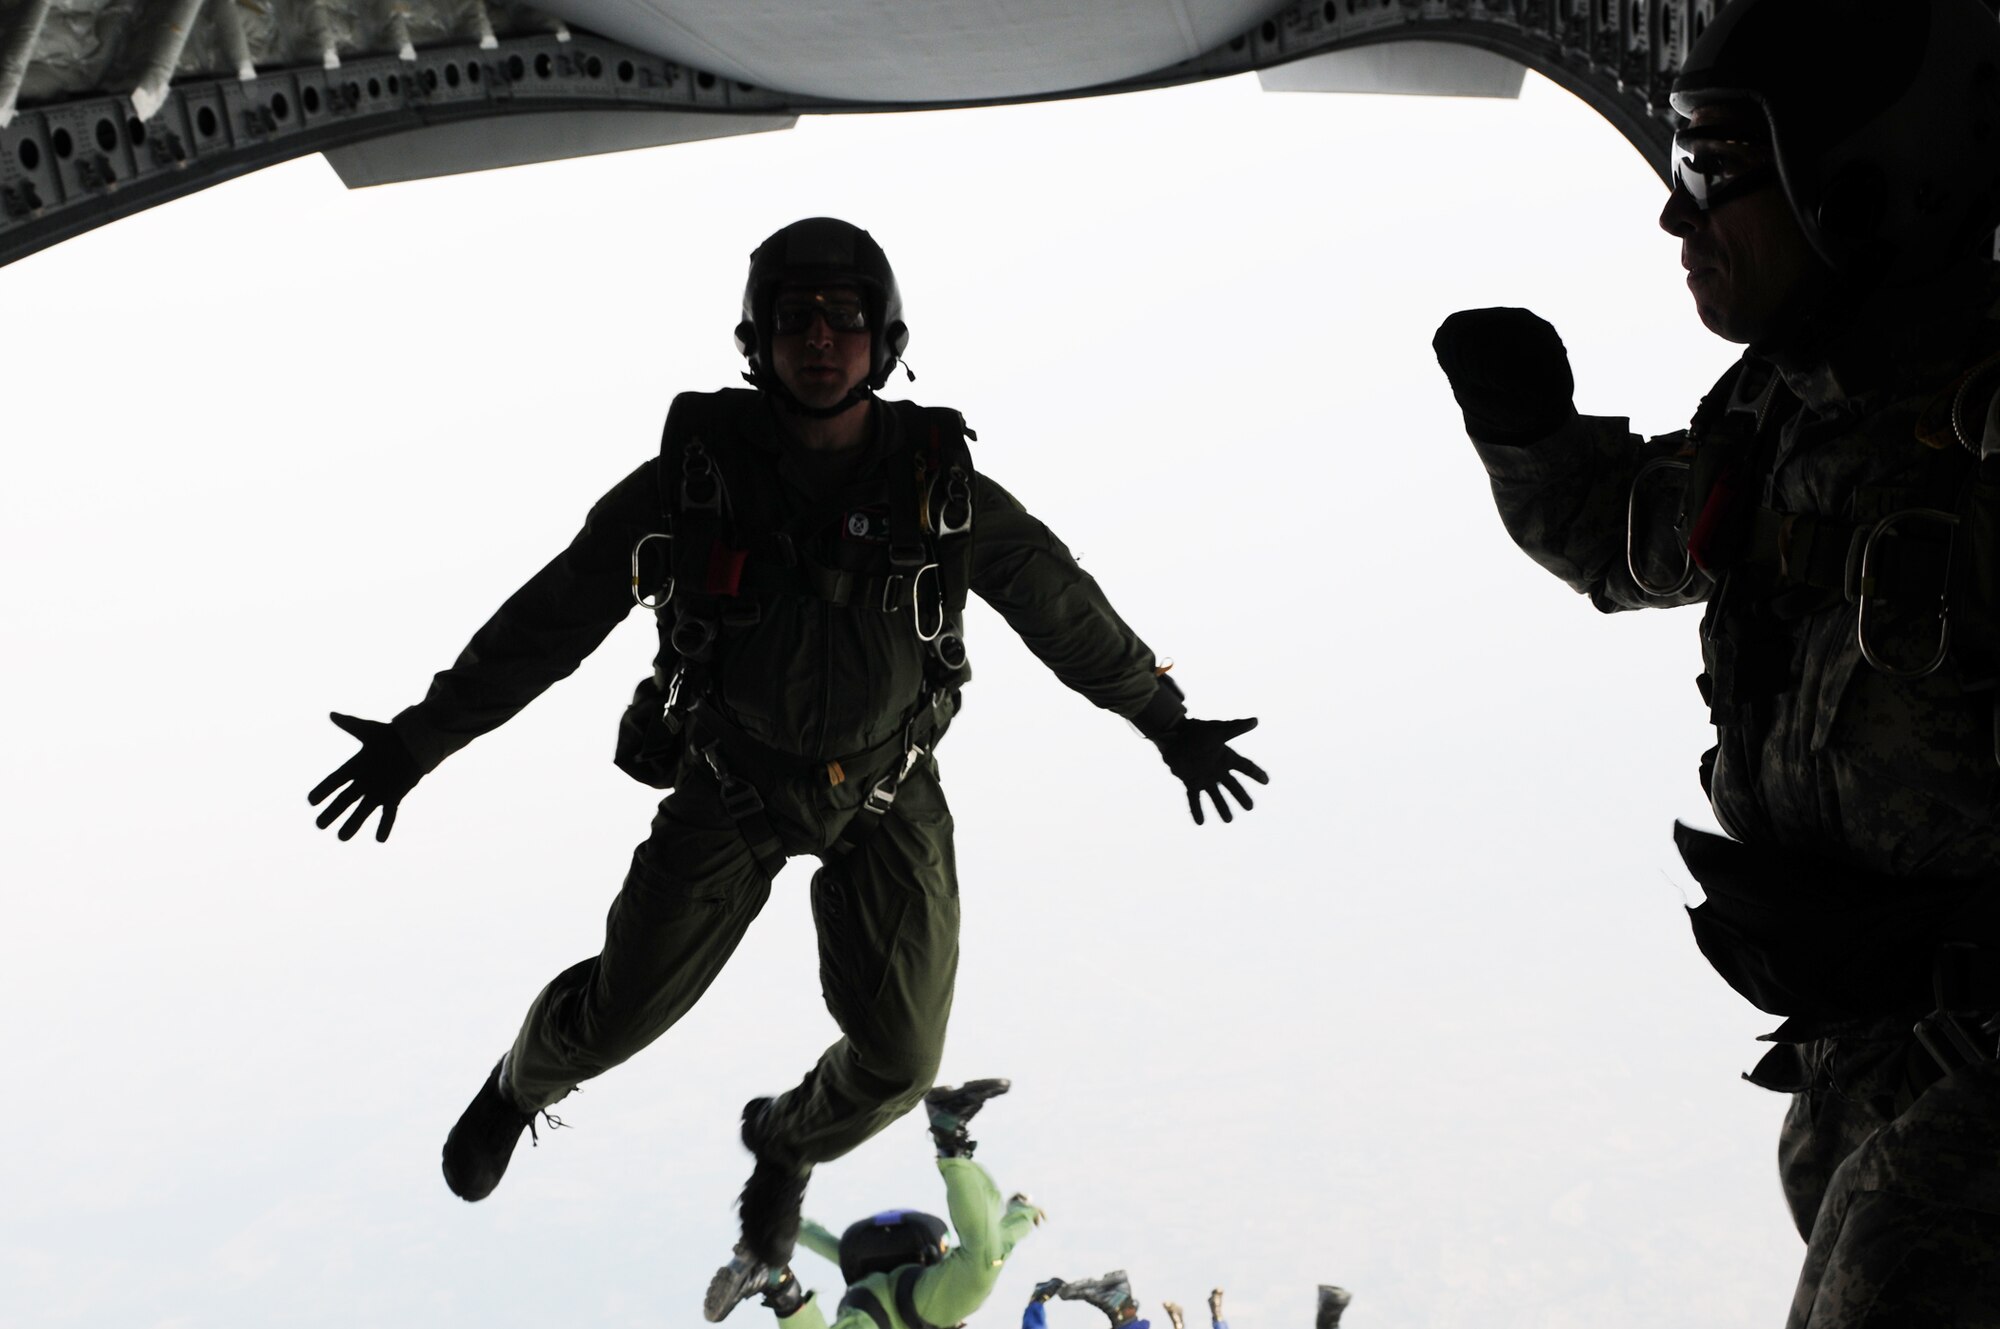 An Airmen assigned to the 353rd Combat Training Squadron jumps out of a C-17 Globemaster III during the first ever combined high-altitude low-opening mission with the United States and Indian air forces at Air Force Station Agra, India, )ct. 19, 2009. More than 150 U.S. Air Force and Army personnel are deployed to India for Cope India, a humanitarian assistance disaster relief exercise. (U.S. Air Force photo/Capt. Genieve David)